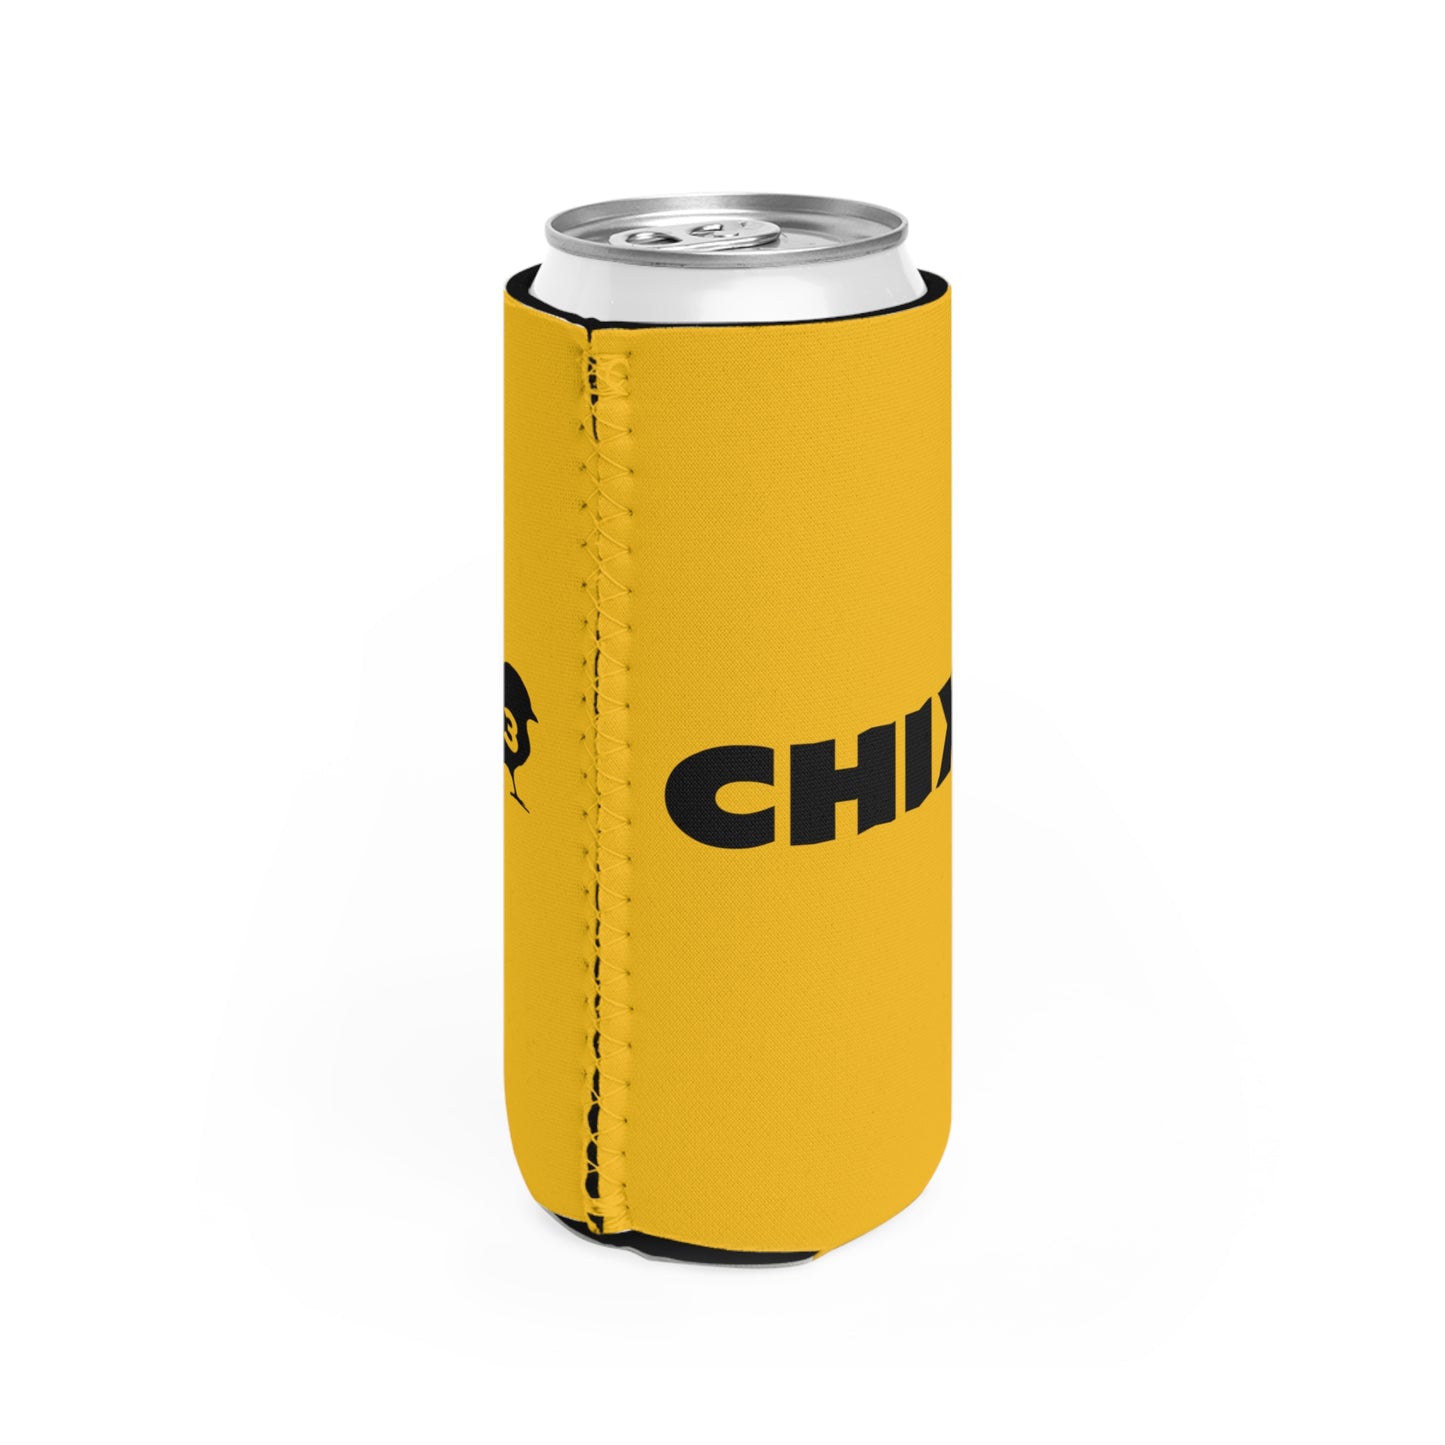 Slim Can Cooler - black on yellow